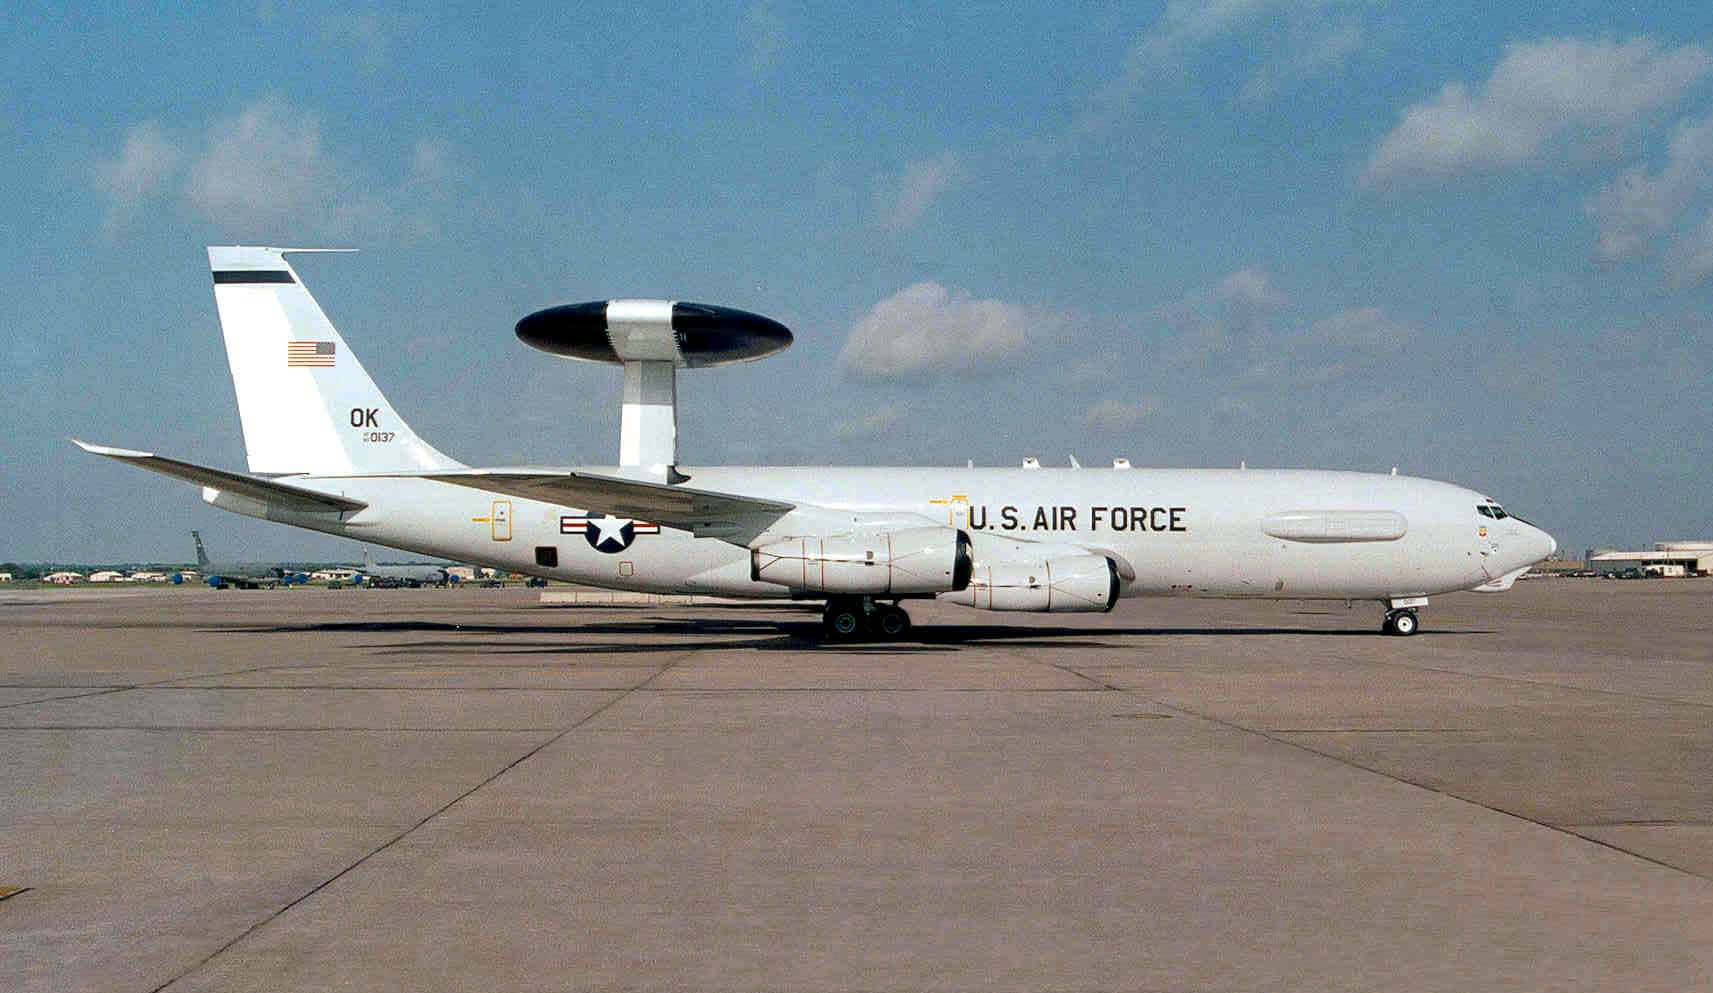 A USAF E-3 Sentry parked on an airfield apron.